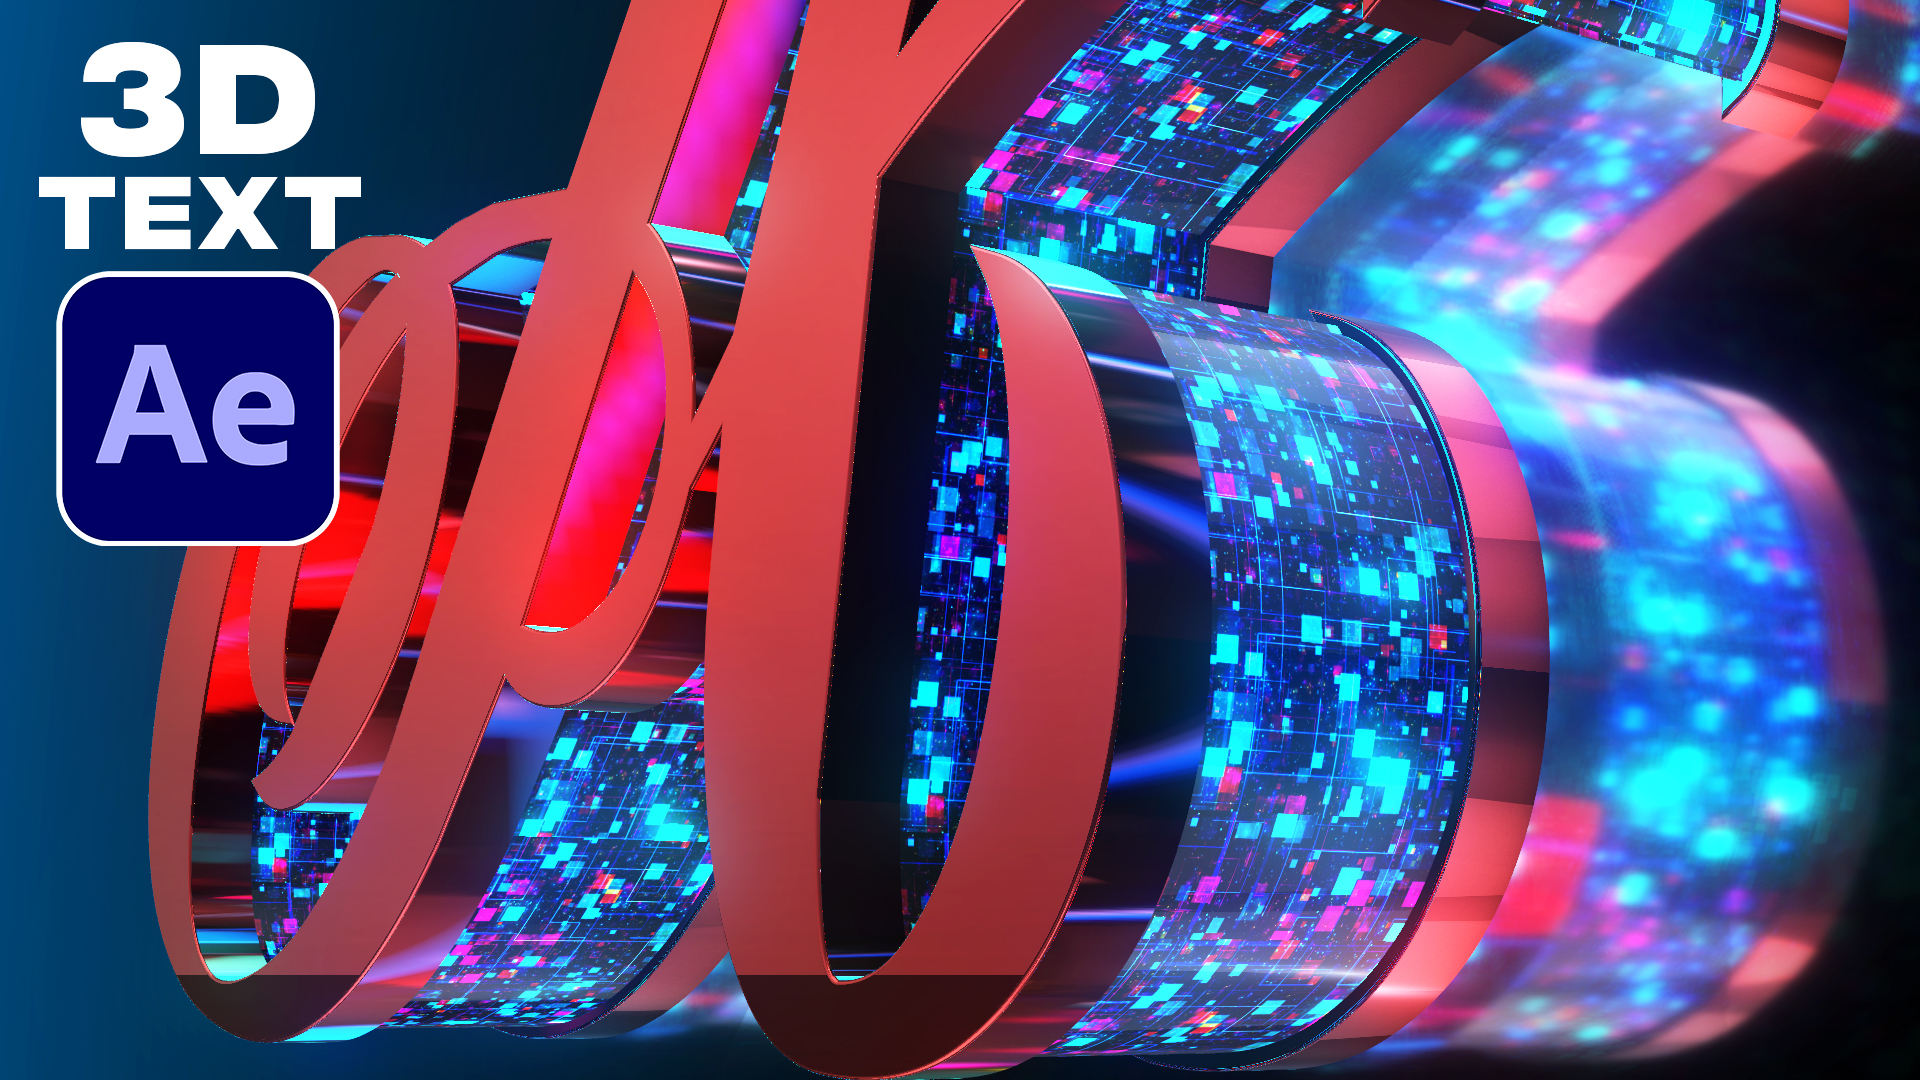 After Effects 3D Text Tutorial With Element 3D | Free Project